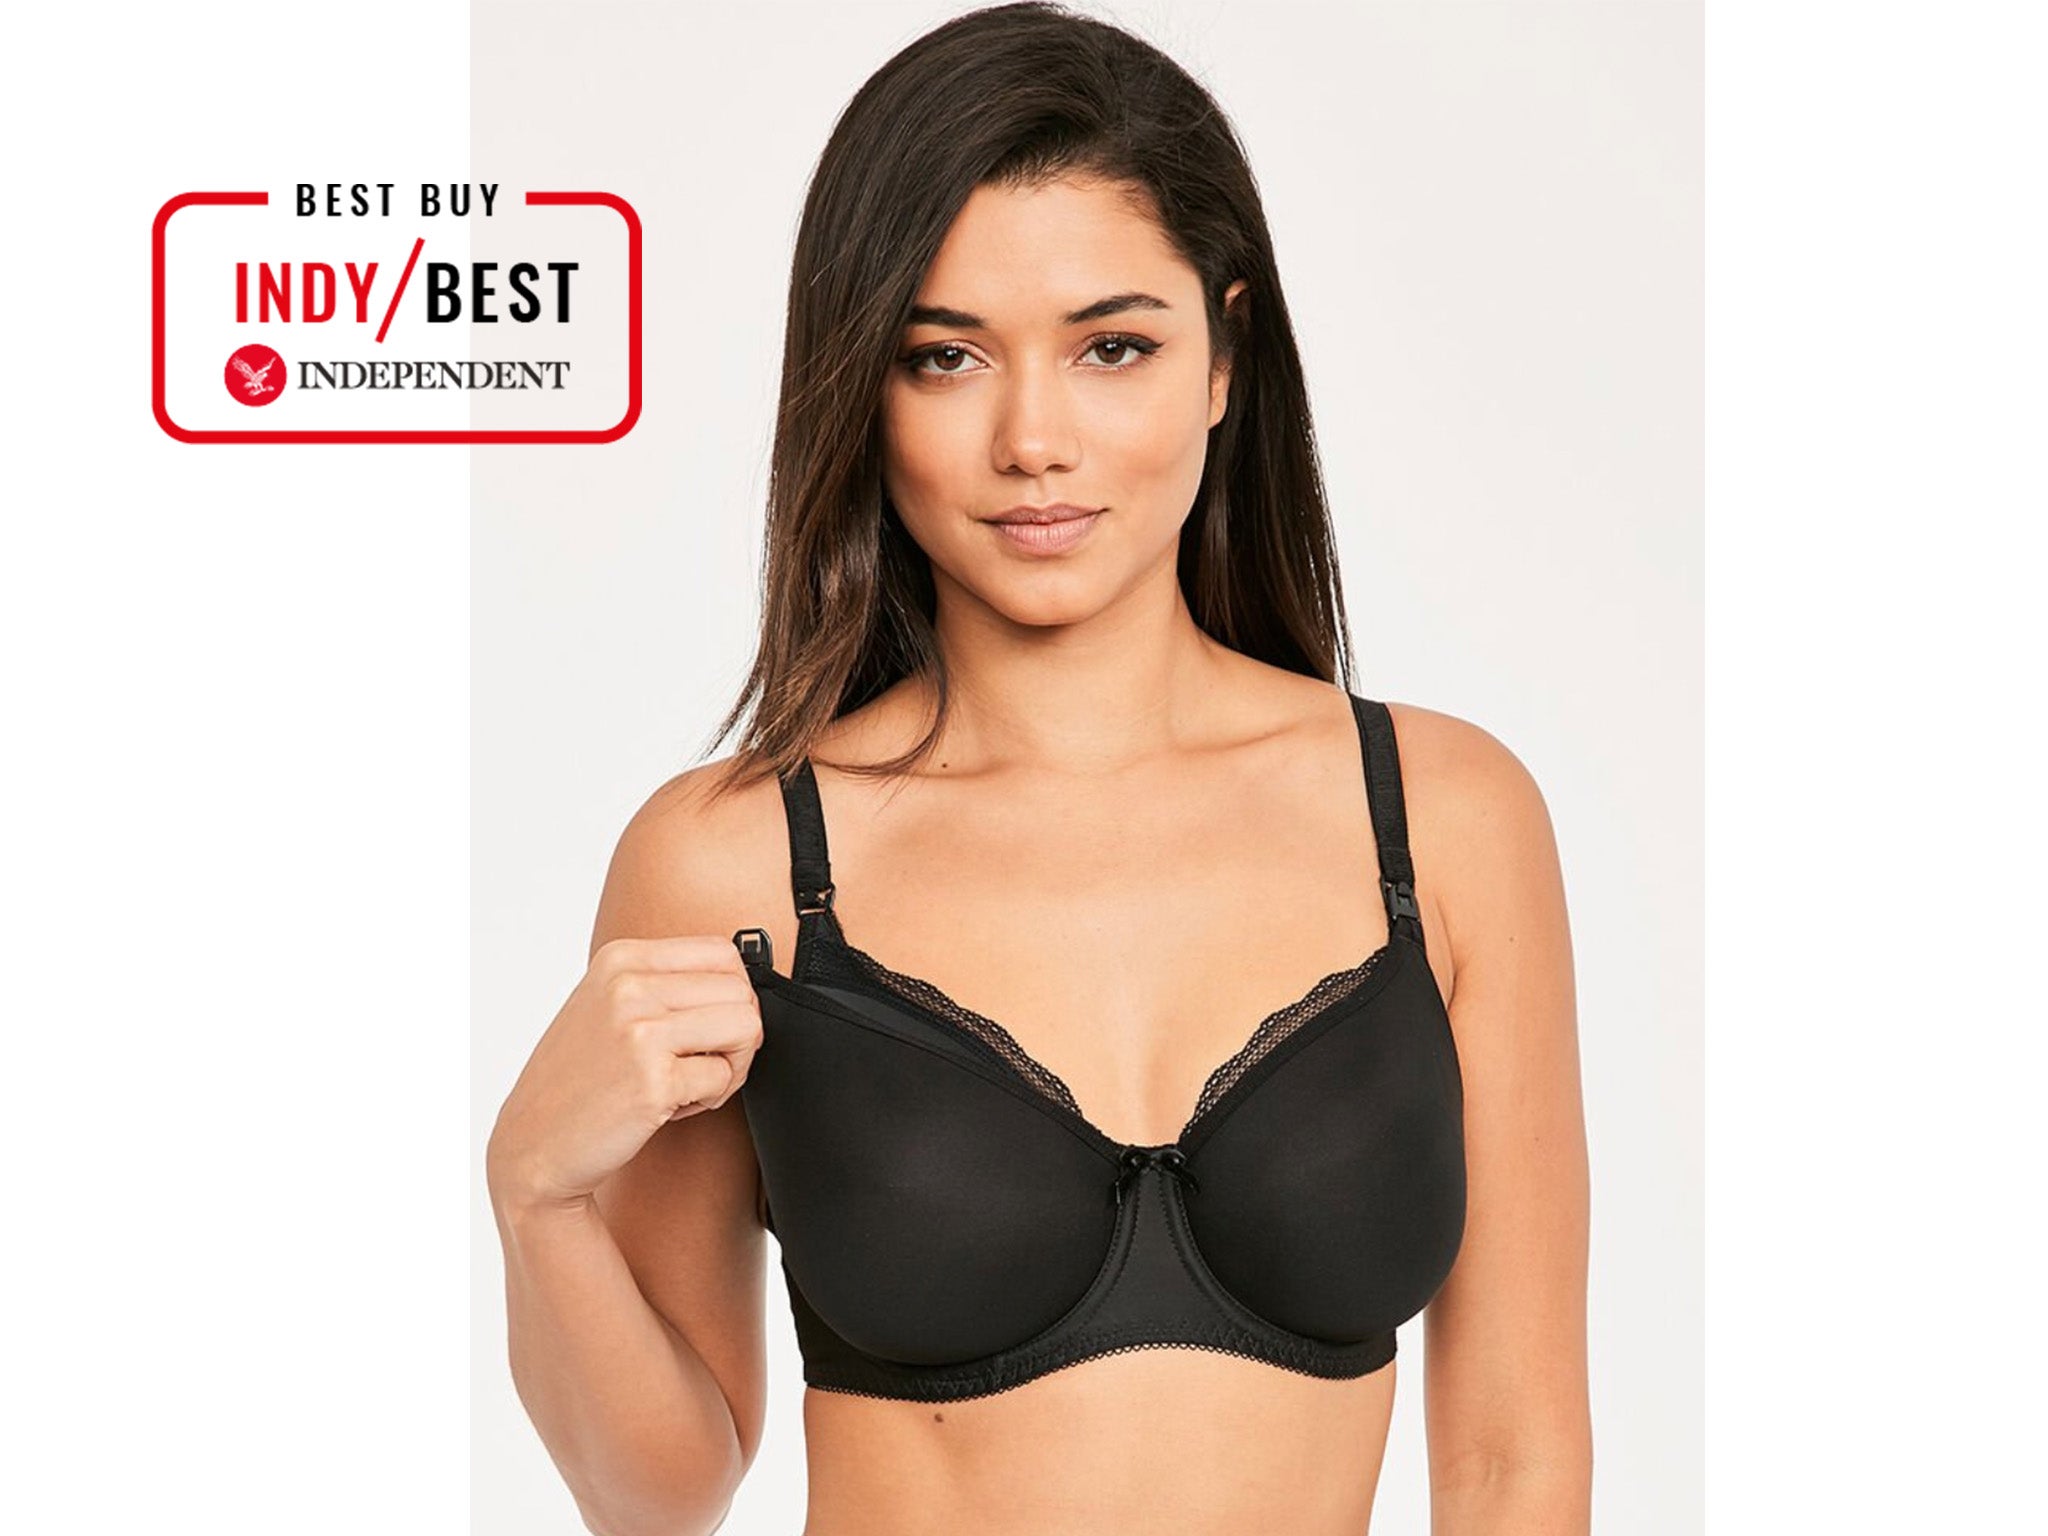 Your bras can still look and feel nice while your post-partum and breastfeeding